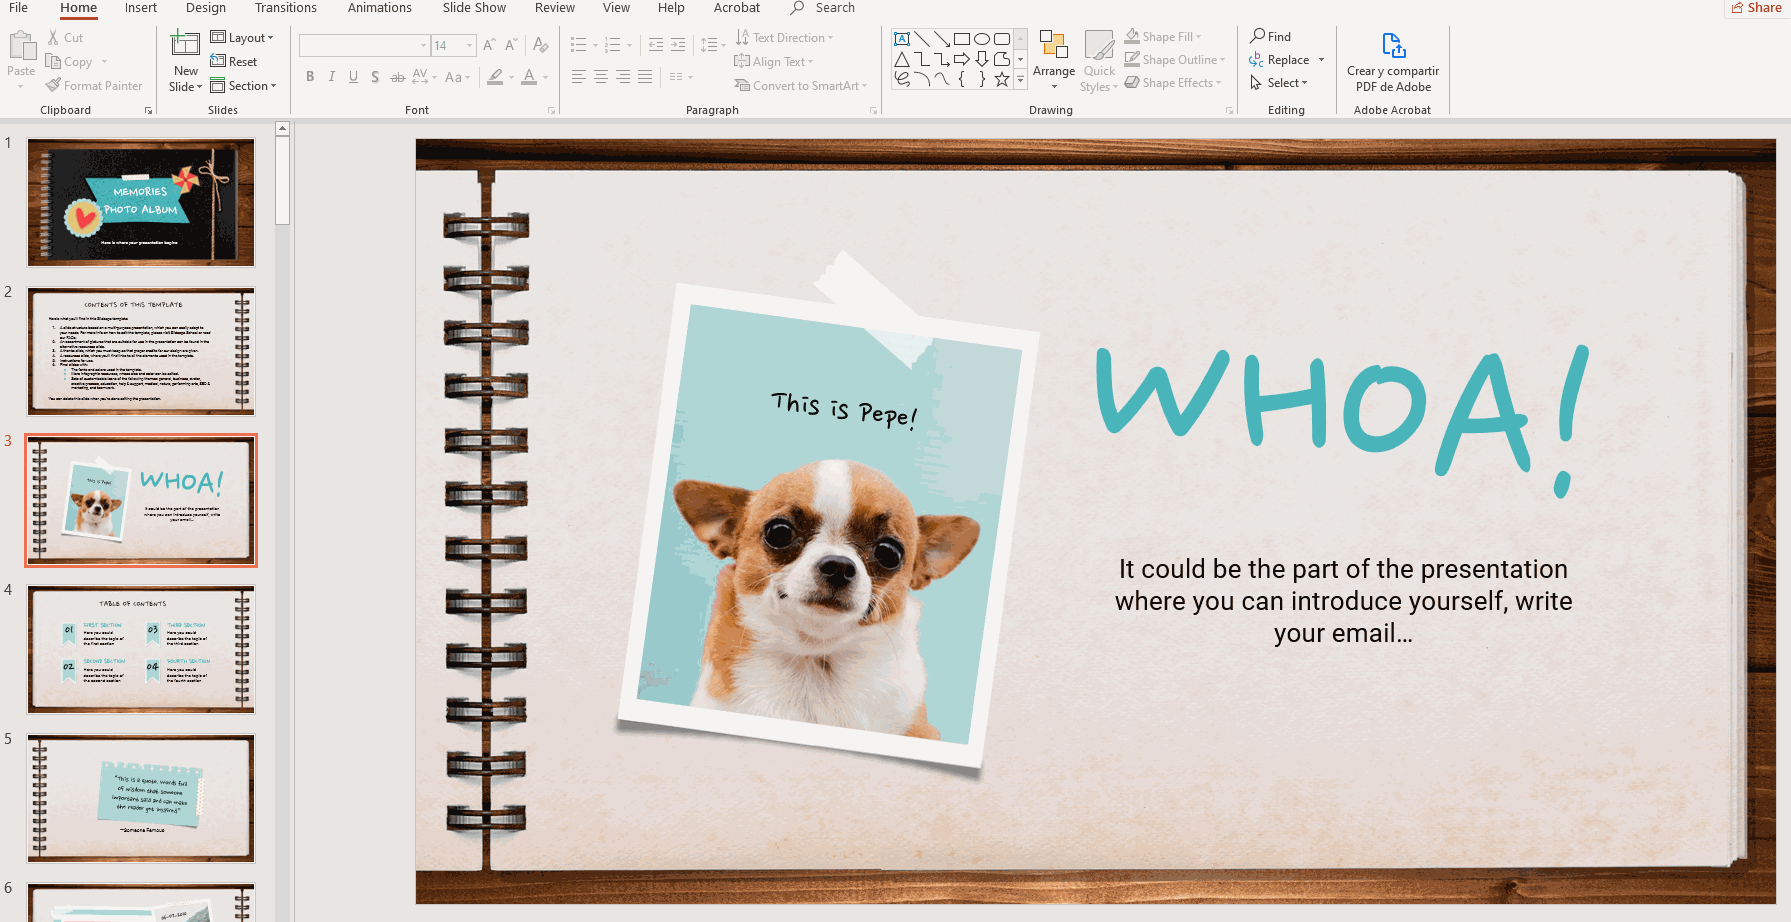 cach lam powerpoint 9